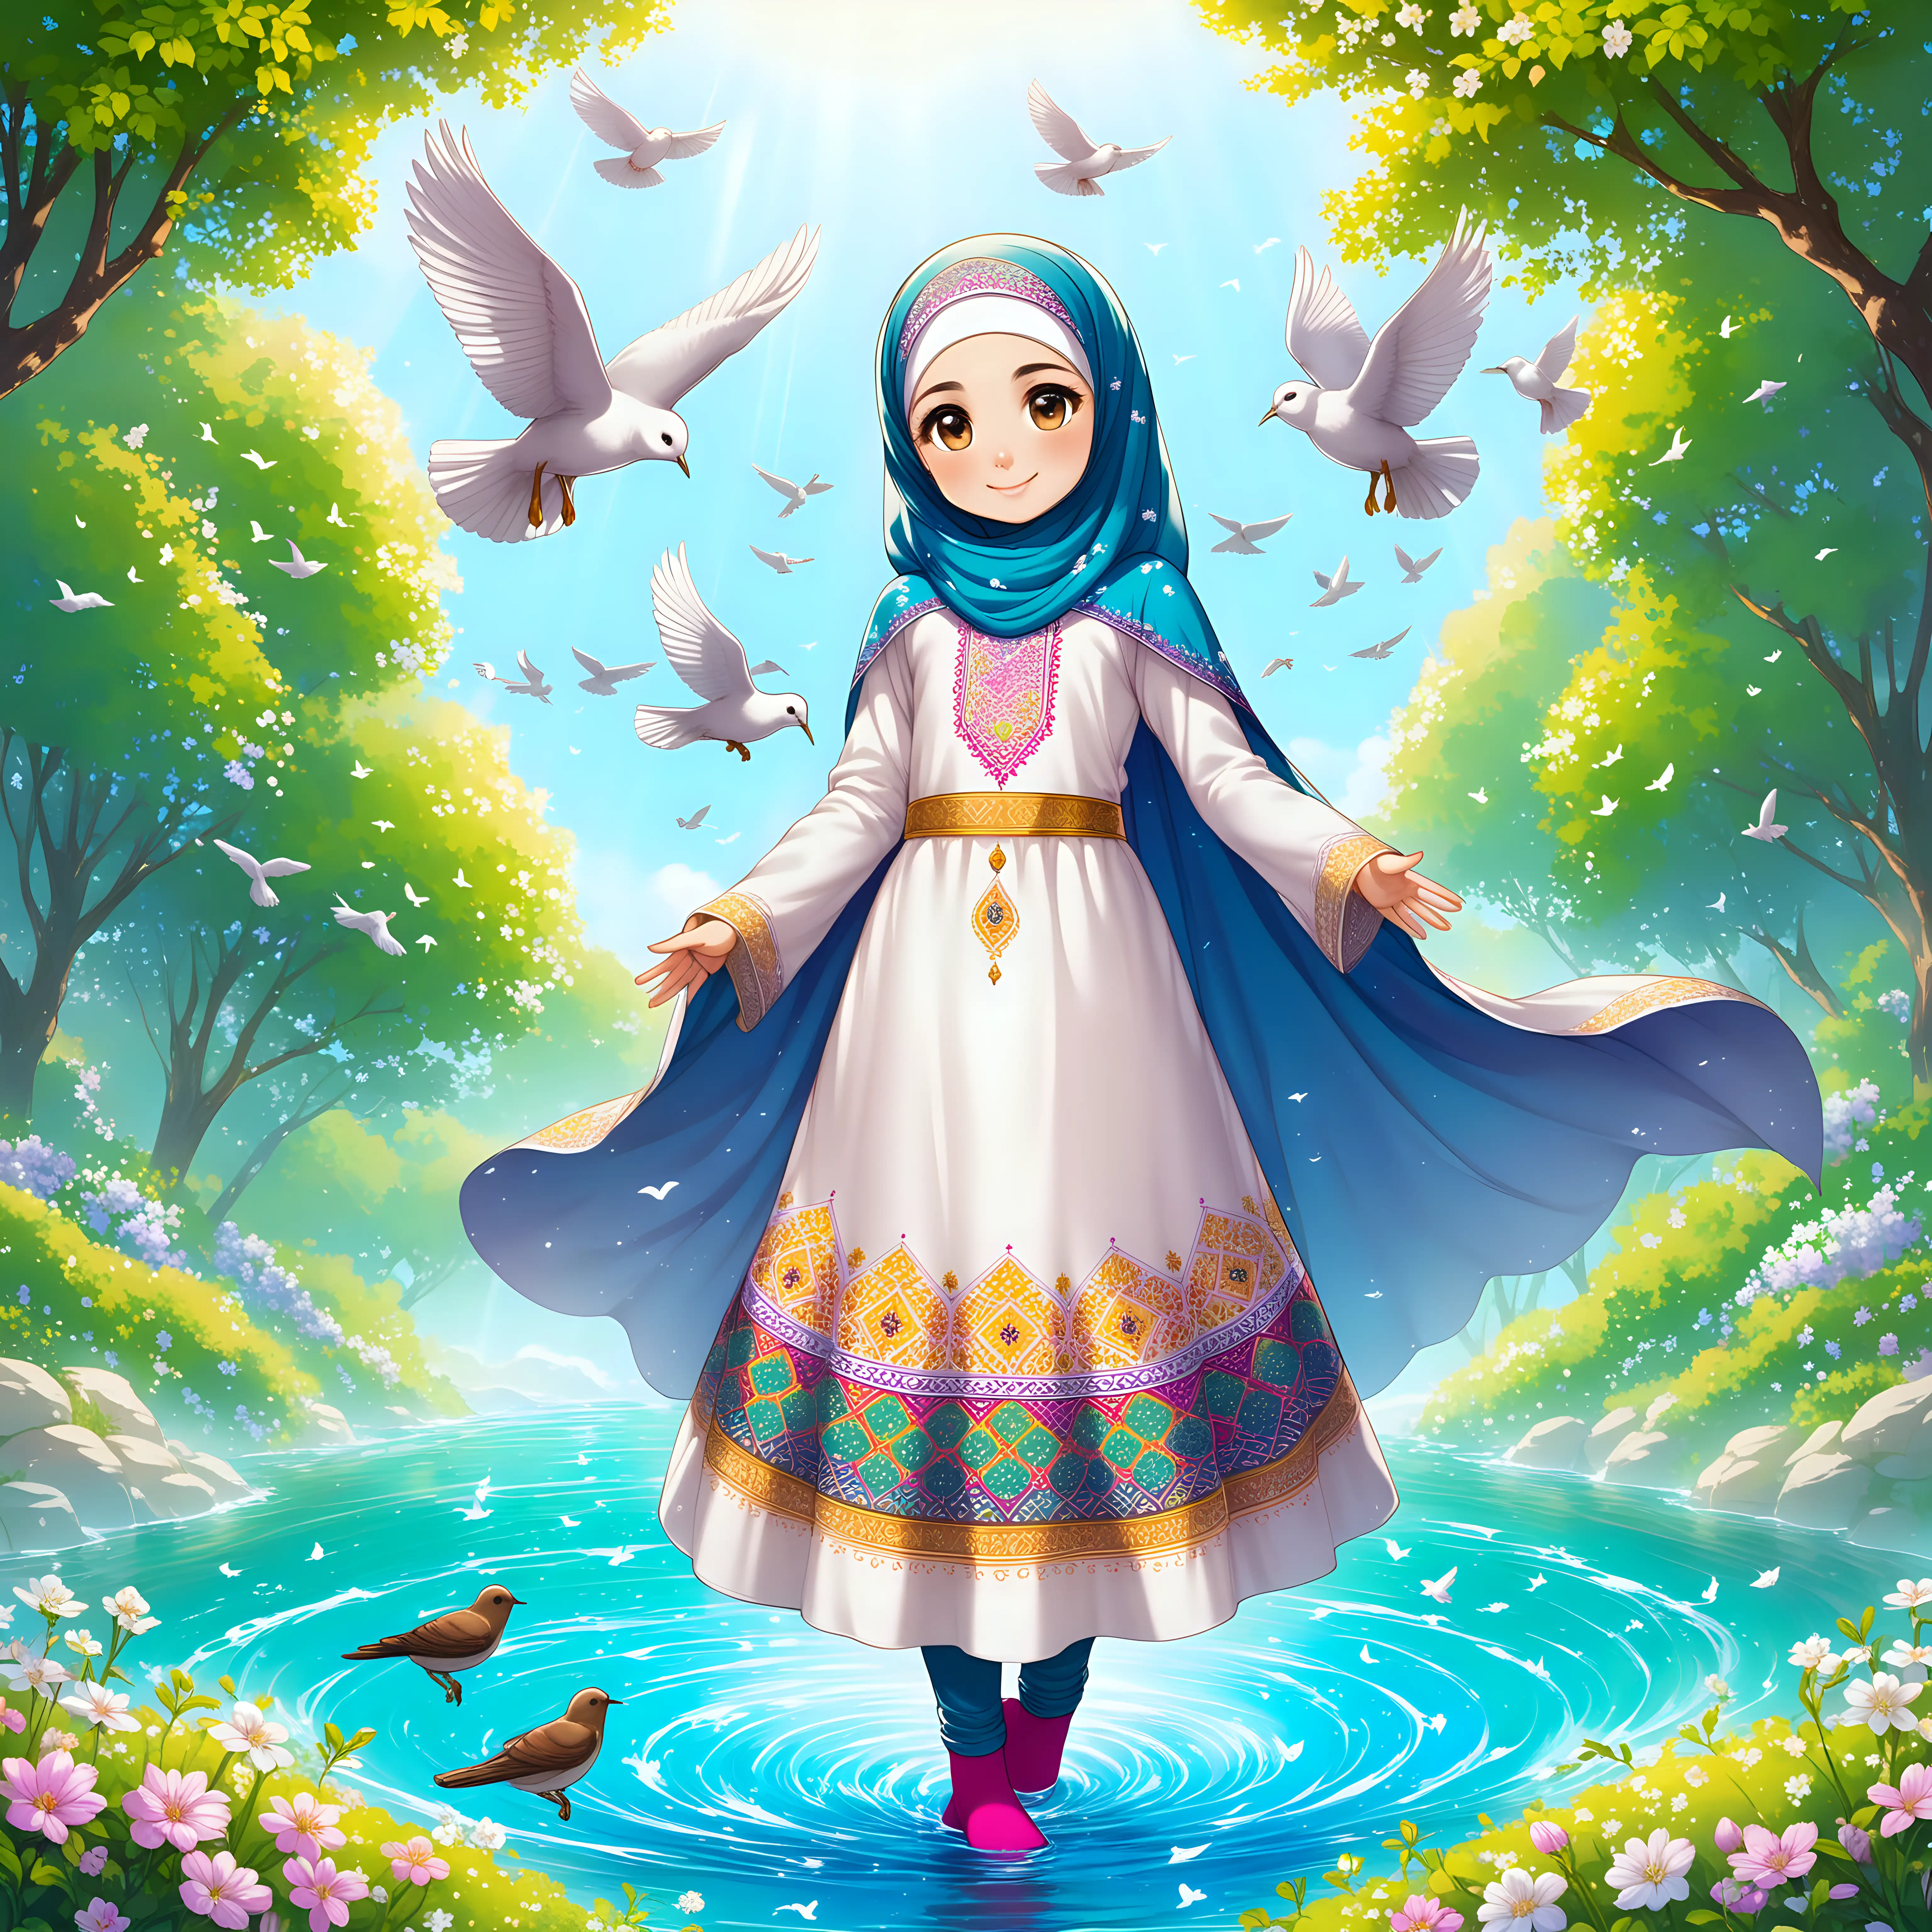 Character 10 years old Persian girl(full height, Muslim, neat fingers, with emphasis no hair out of veil(Hijab), smaller eyes, bigger nose, white skin, cute, smiling, wearing socks, clothes full of Persian designs, heavenly girl).

Atmosphere flowing water from the spring with flowers, nightingales and flying birds in spring.